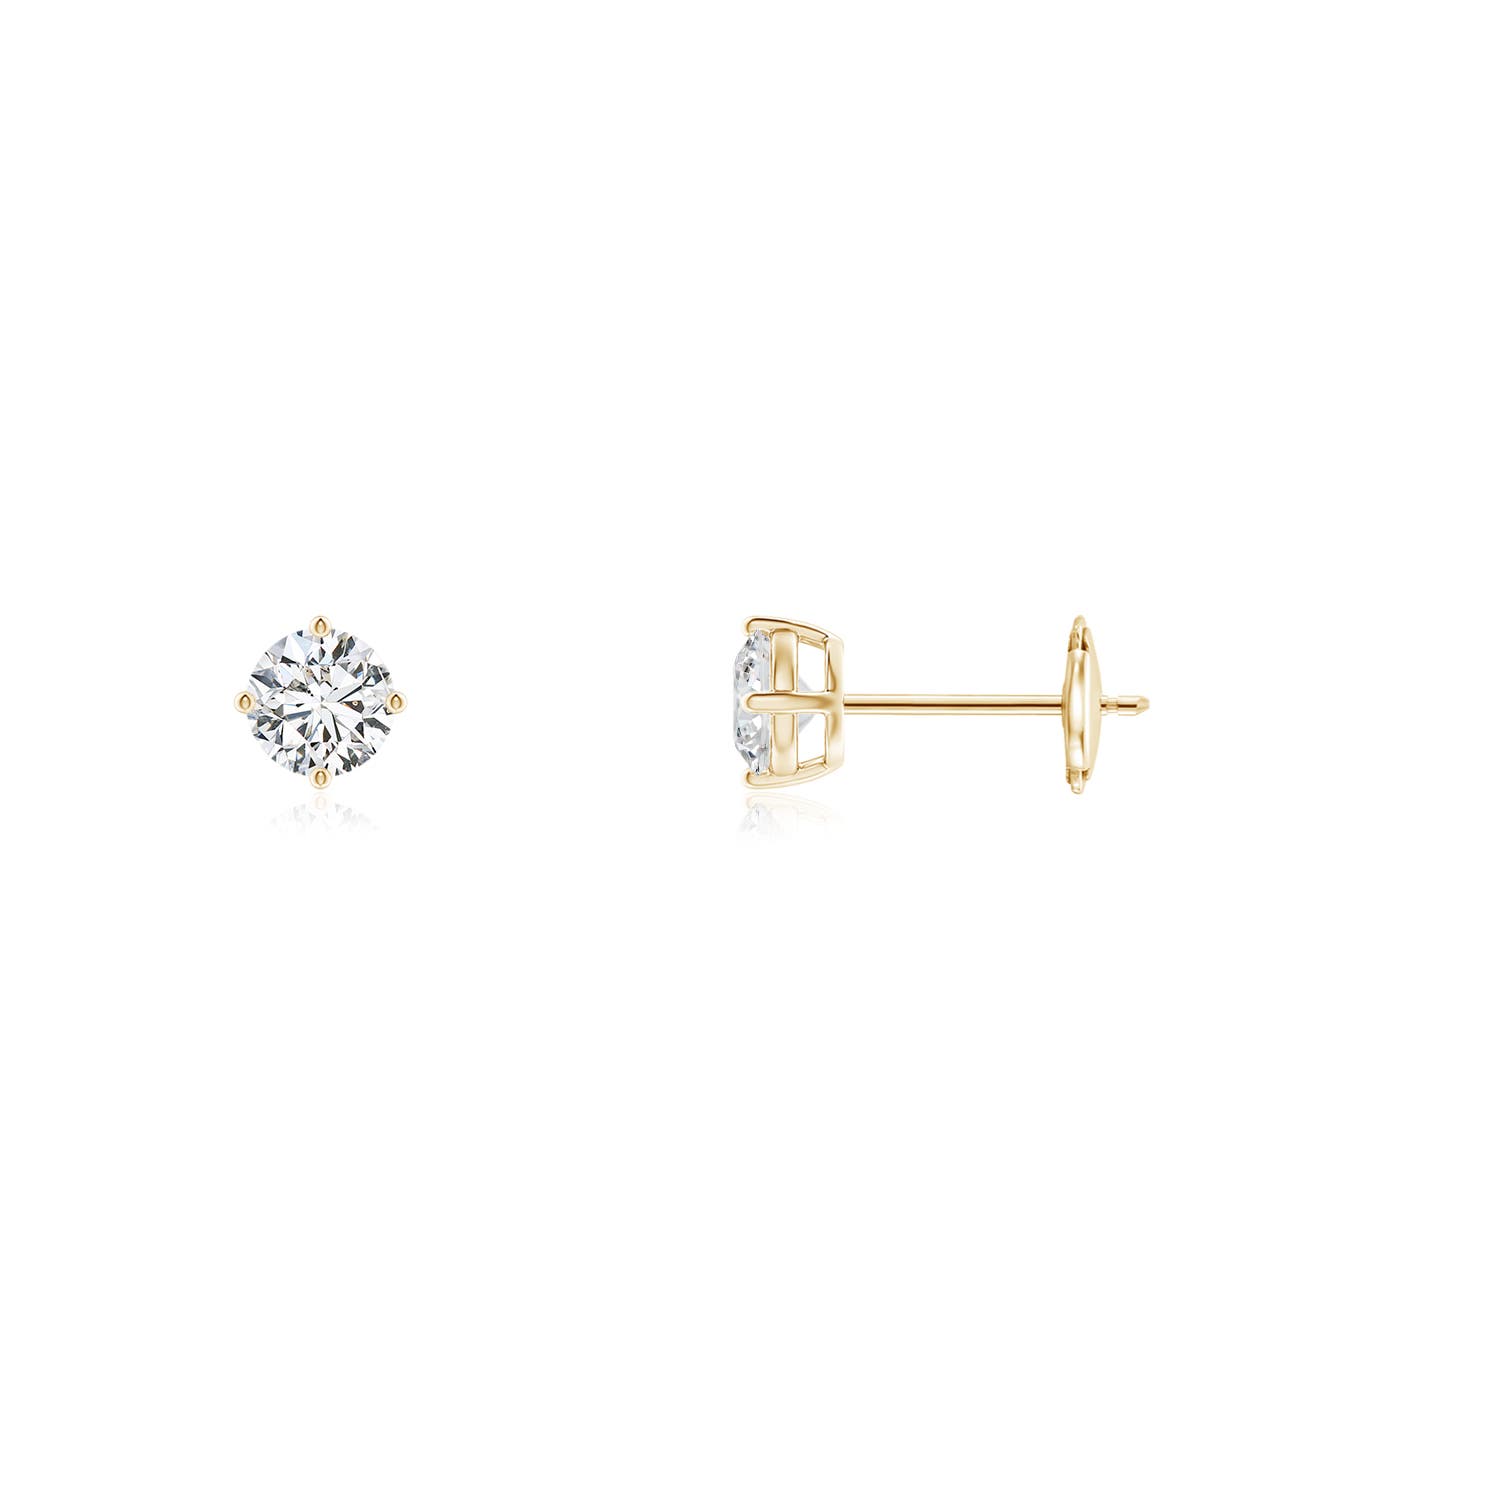 HSI2 / 0.25 CT / 14 KT Yellow Gold